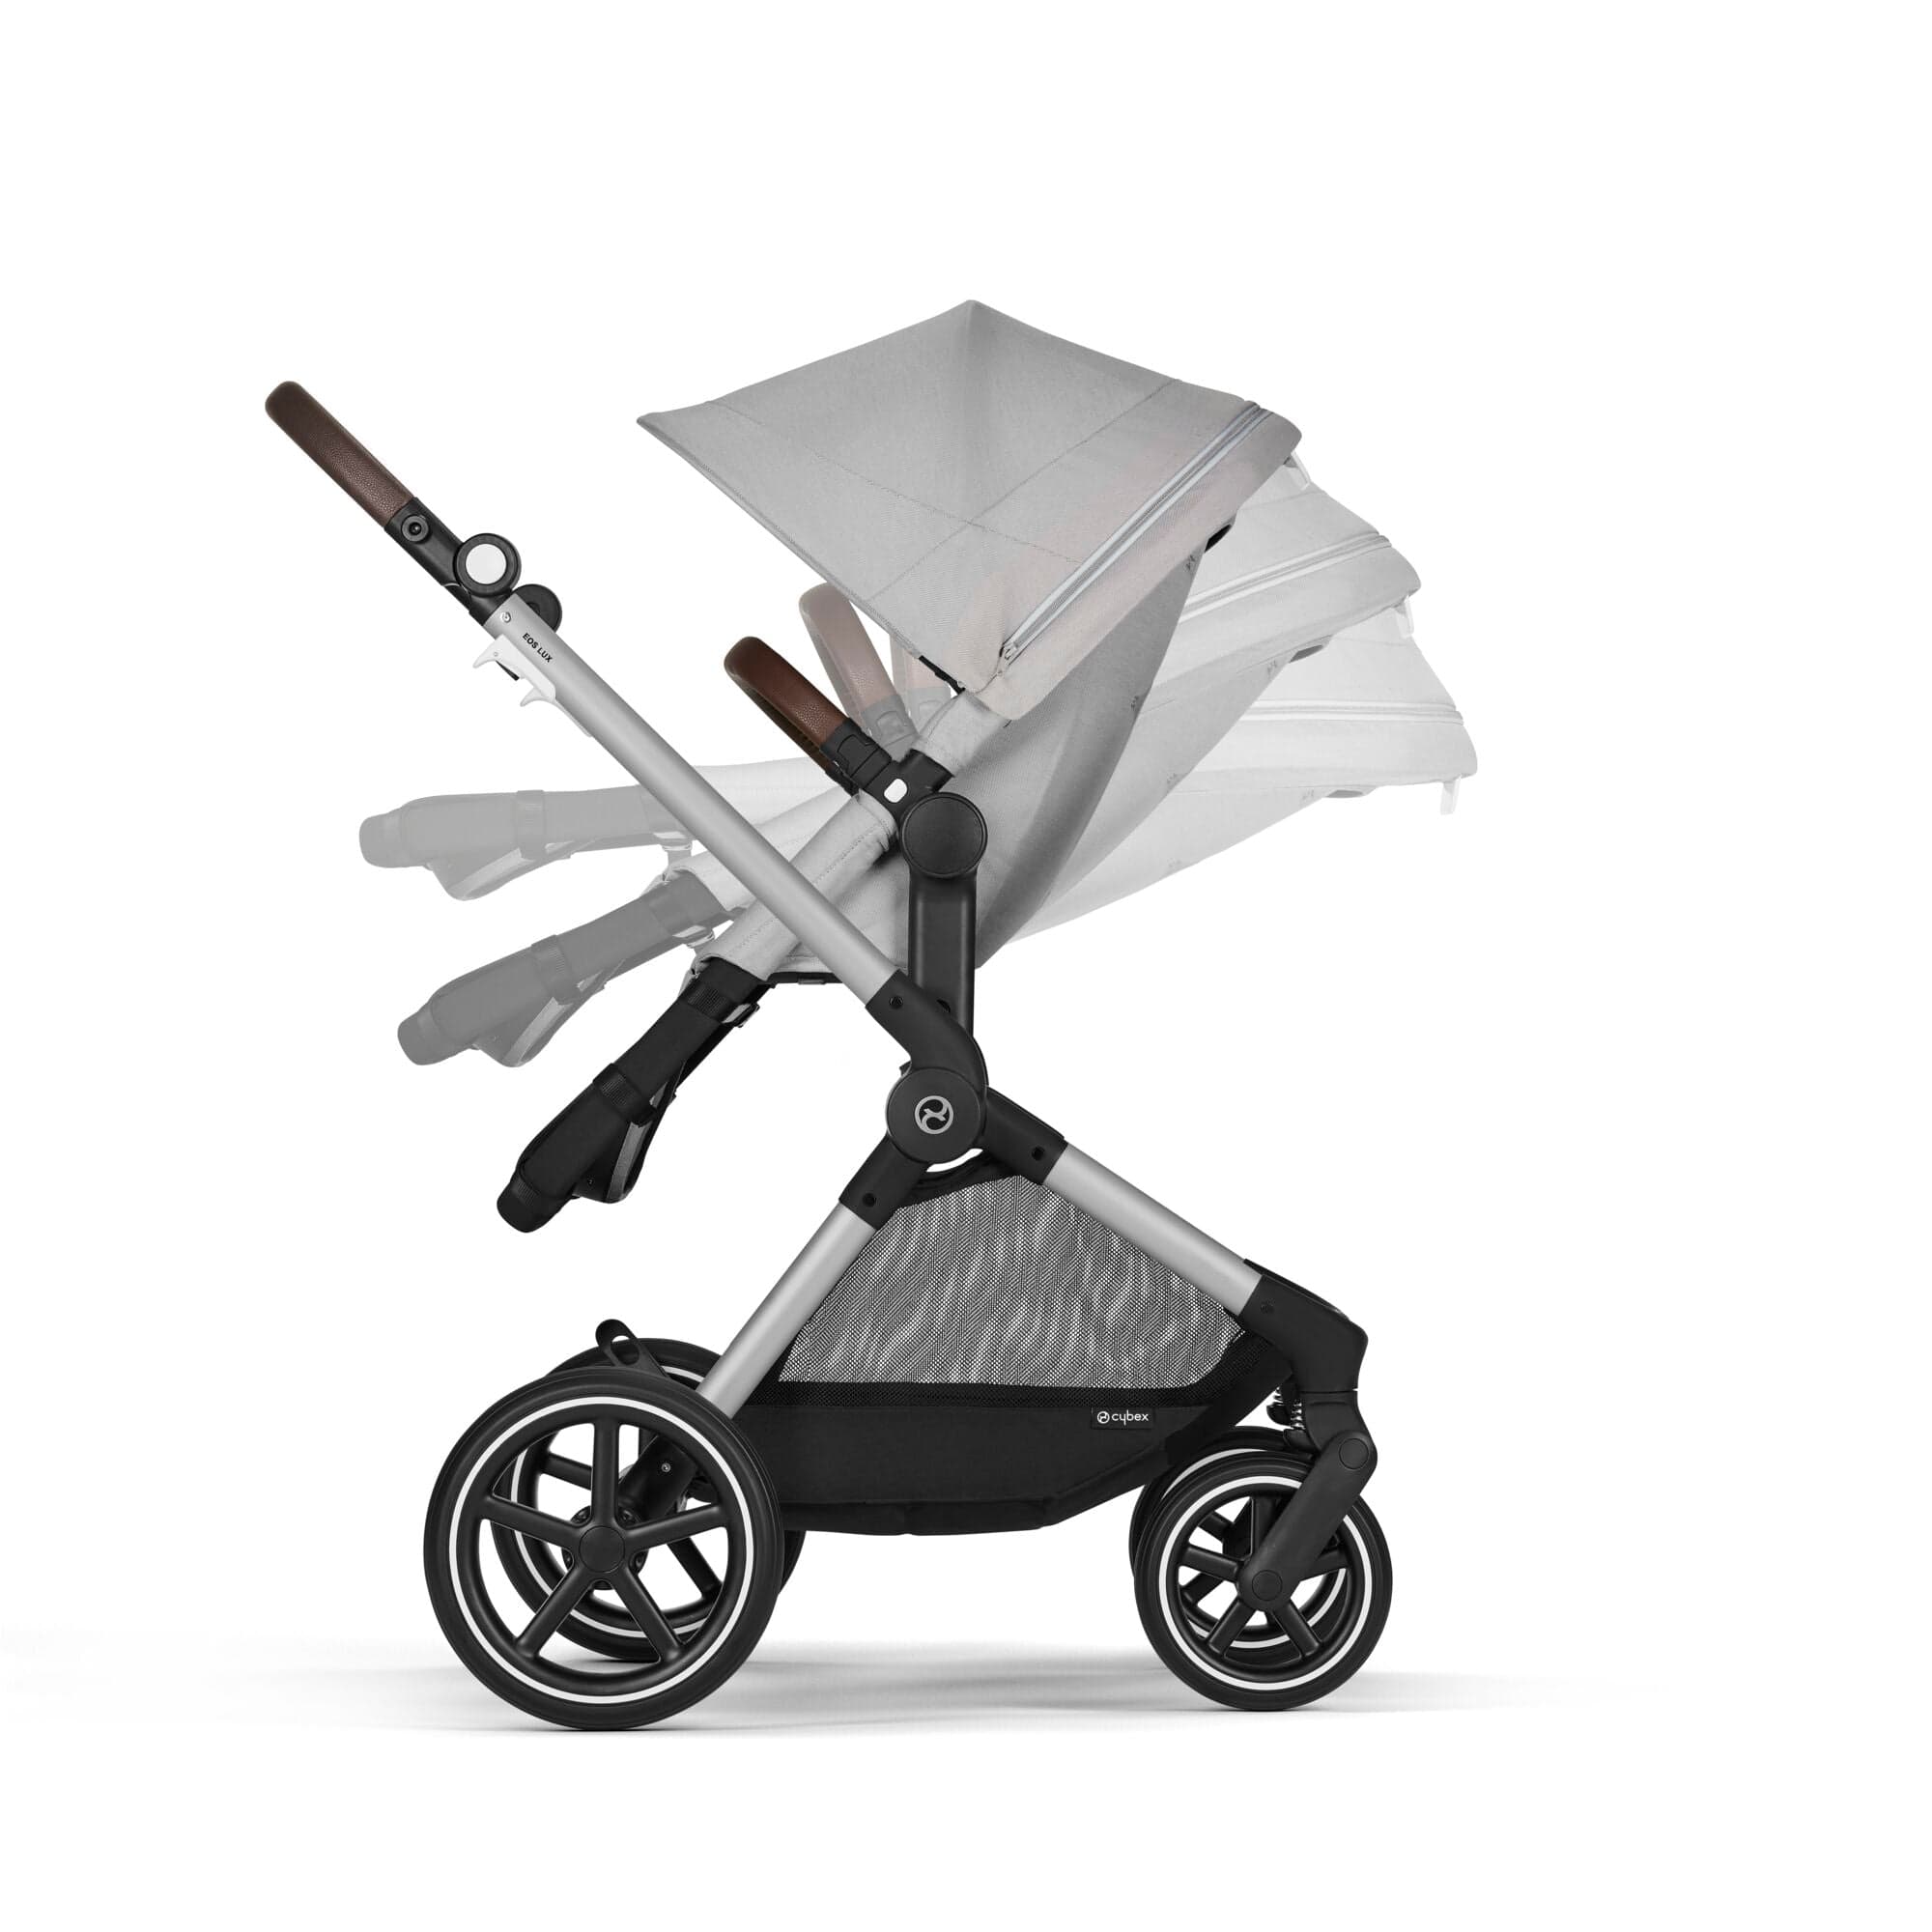 Cybex Eos Lux Stroller in Lava Grey Travel Systems 522003849 4063846368563